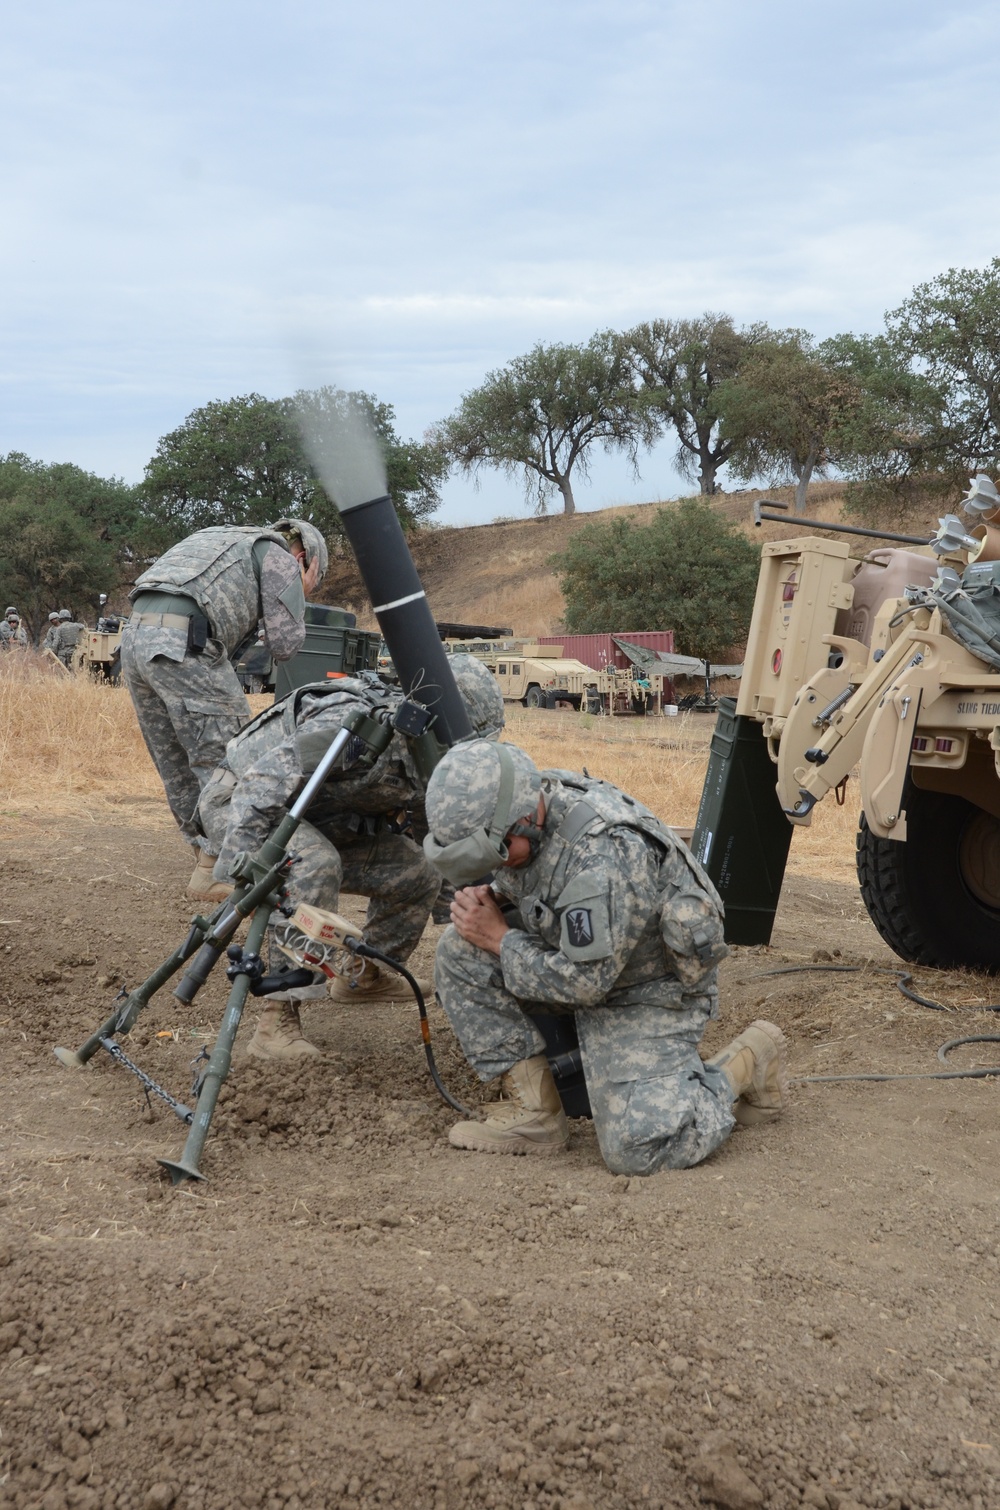 Mortar fire during Cal Guard annual training